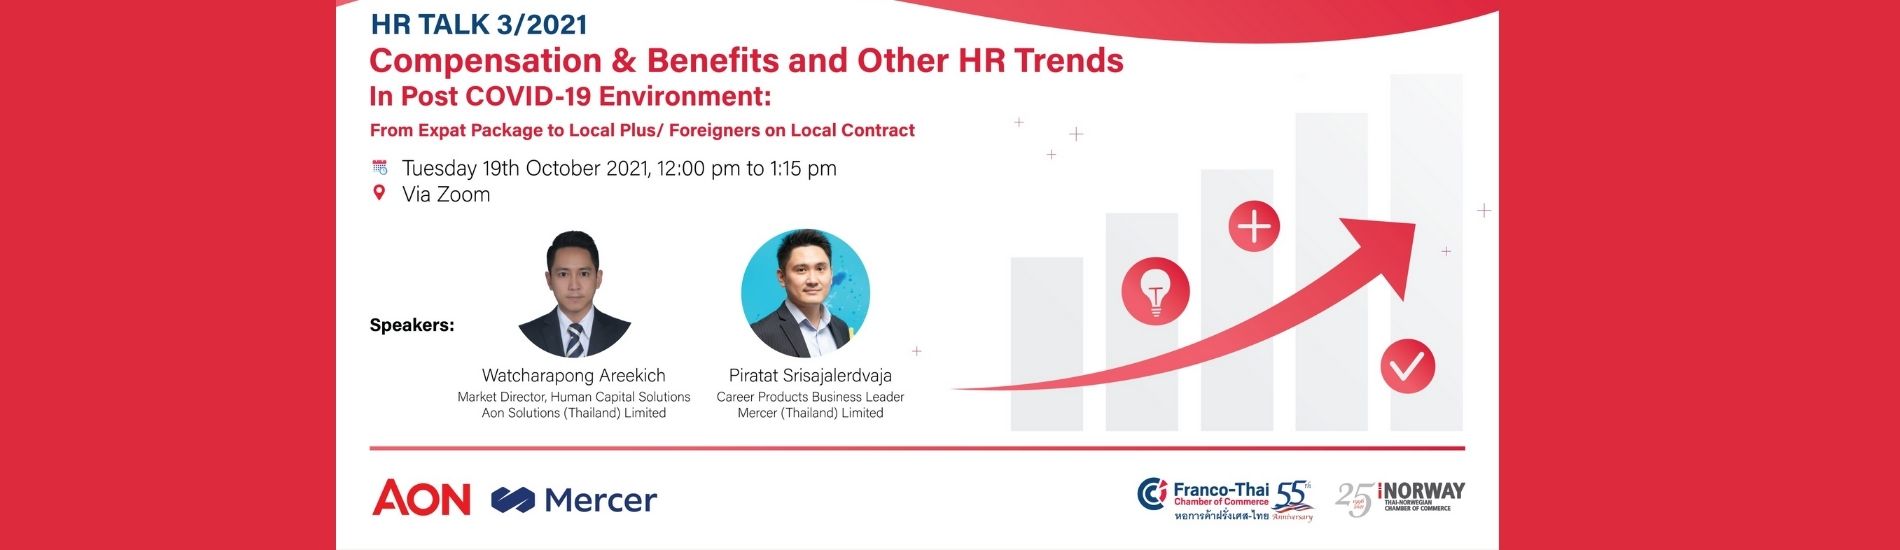 HR Talk 2021: Compensation & Benefits and Other Trends in Post COVID-19 Environment